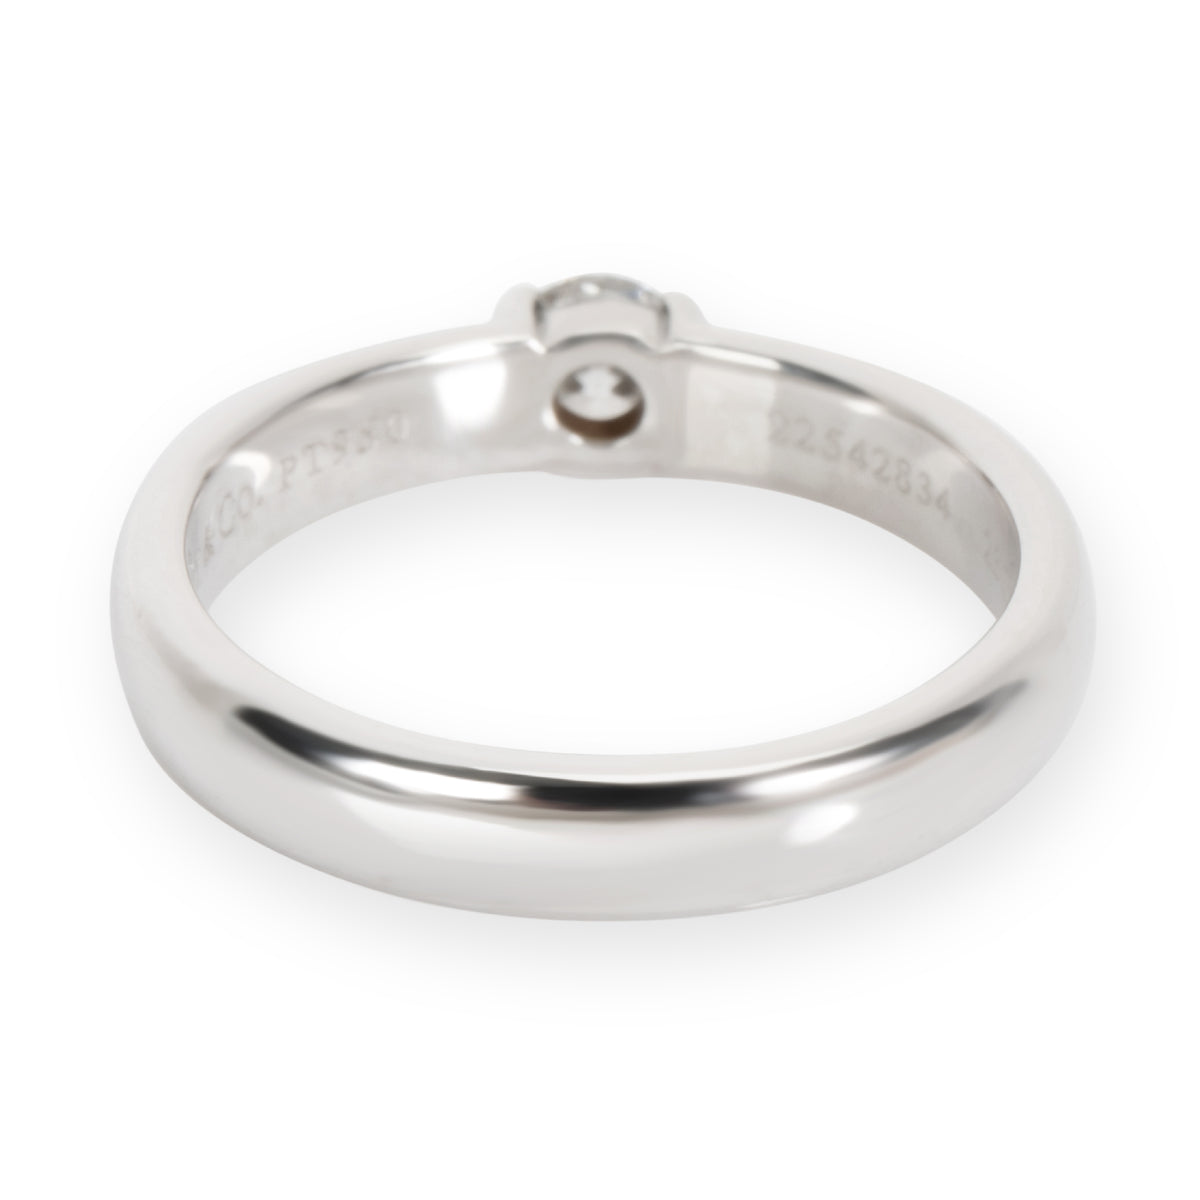 Tiffany & Co. Bezel Solitaire Engagement Ring in Platinum (0.23 ct E/VVS1)